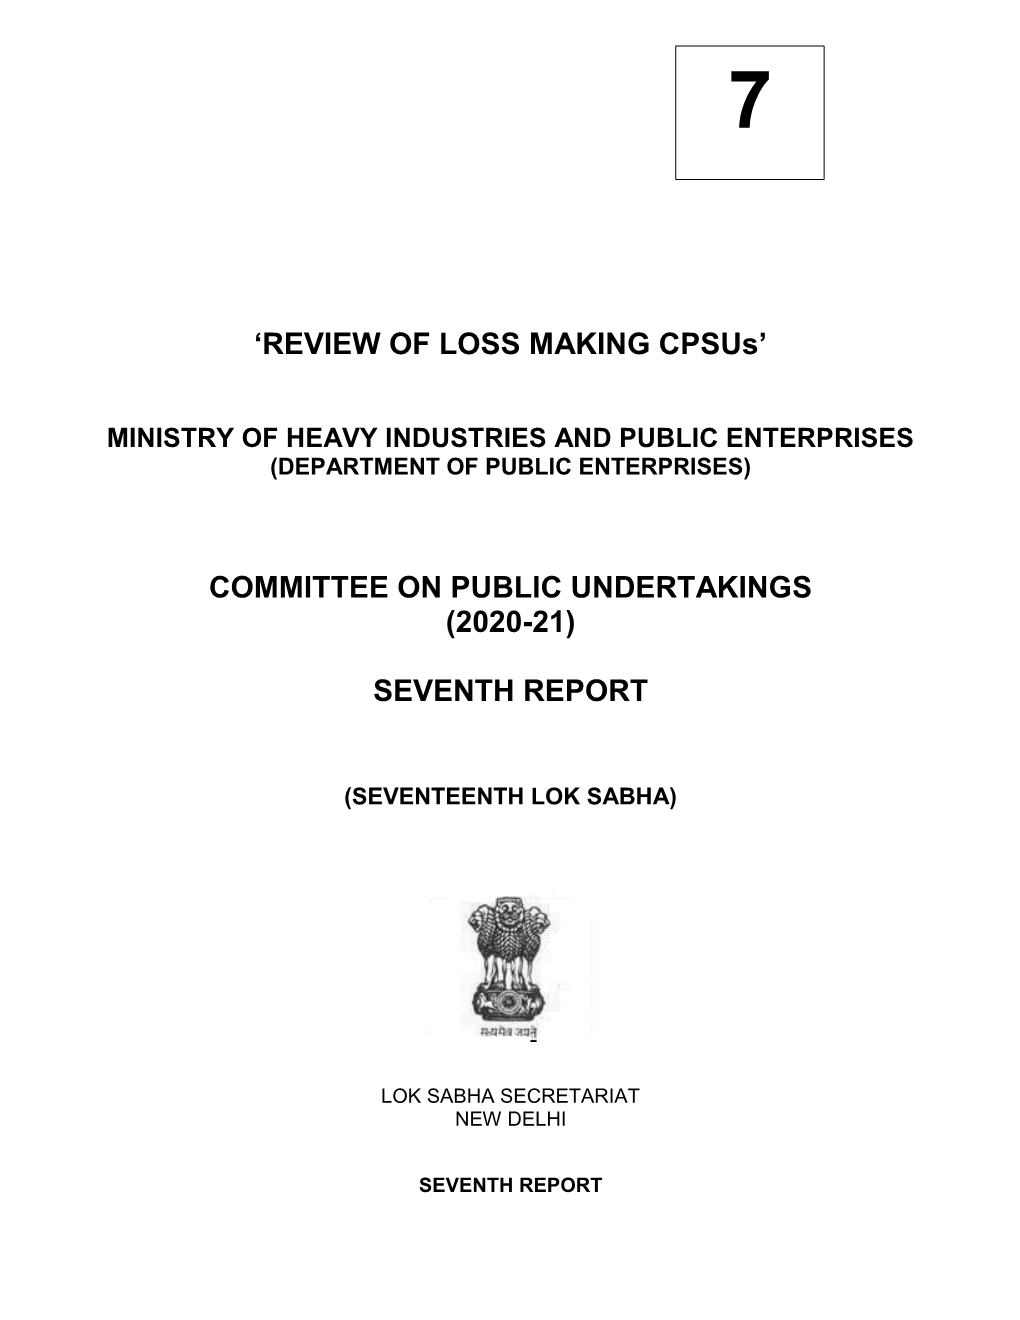 „REVIEW of LOSS MAKING Cpsus‟ COMMITTEE on PUBLIC